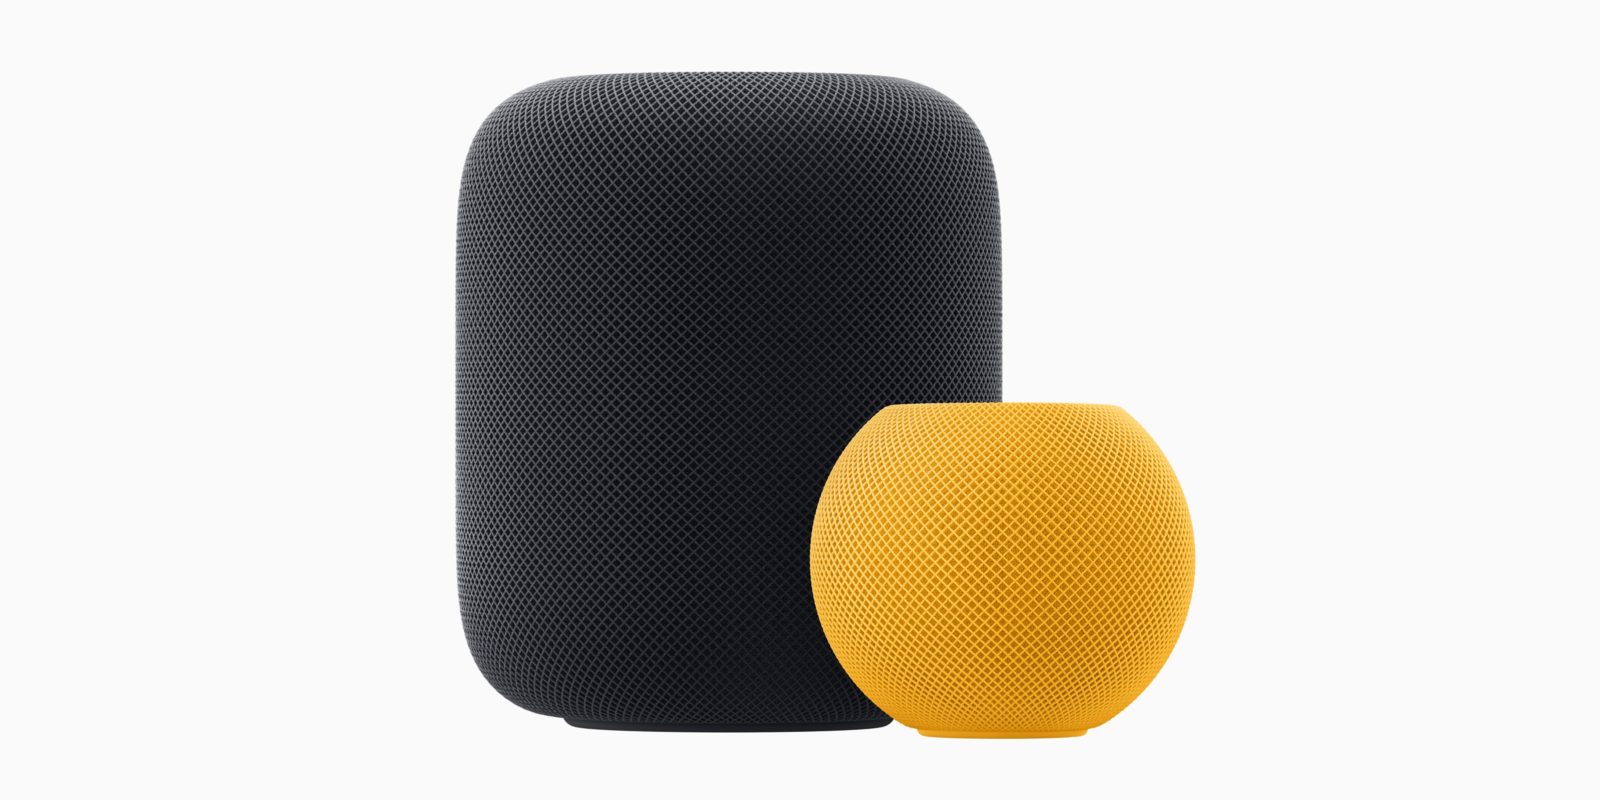 The ‘new’ HomePod and HomePod mini go on sale in Malaysia and Thailand